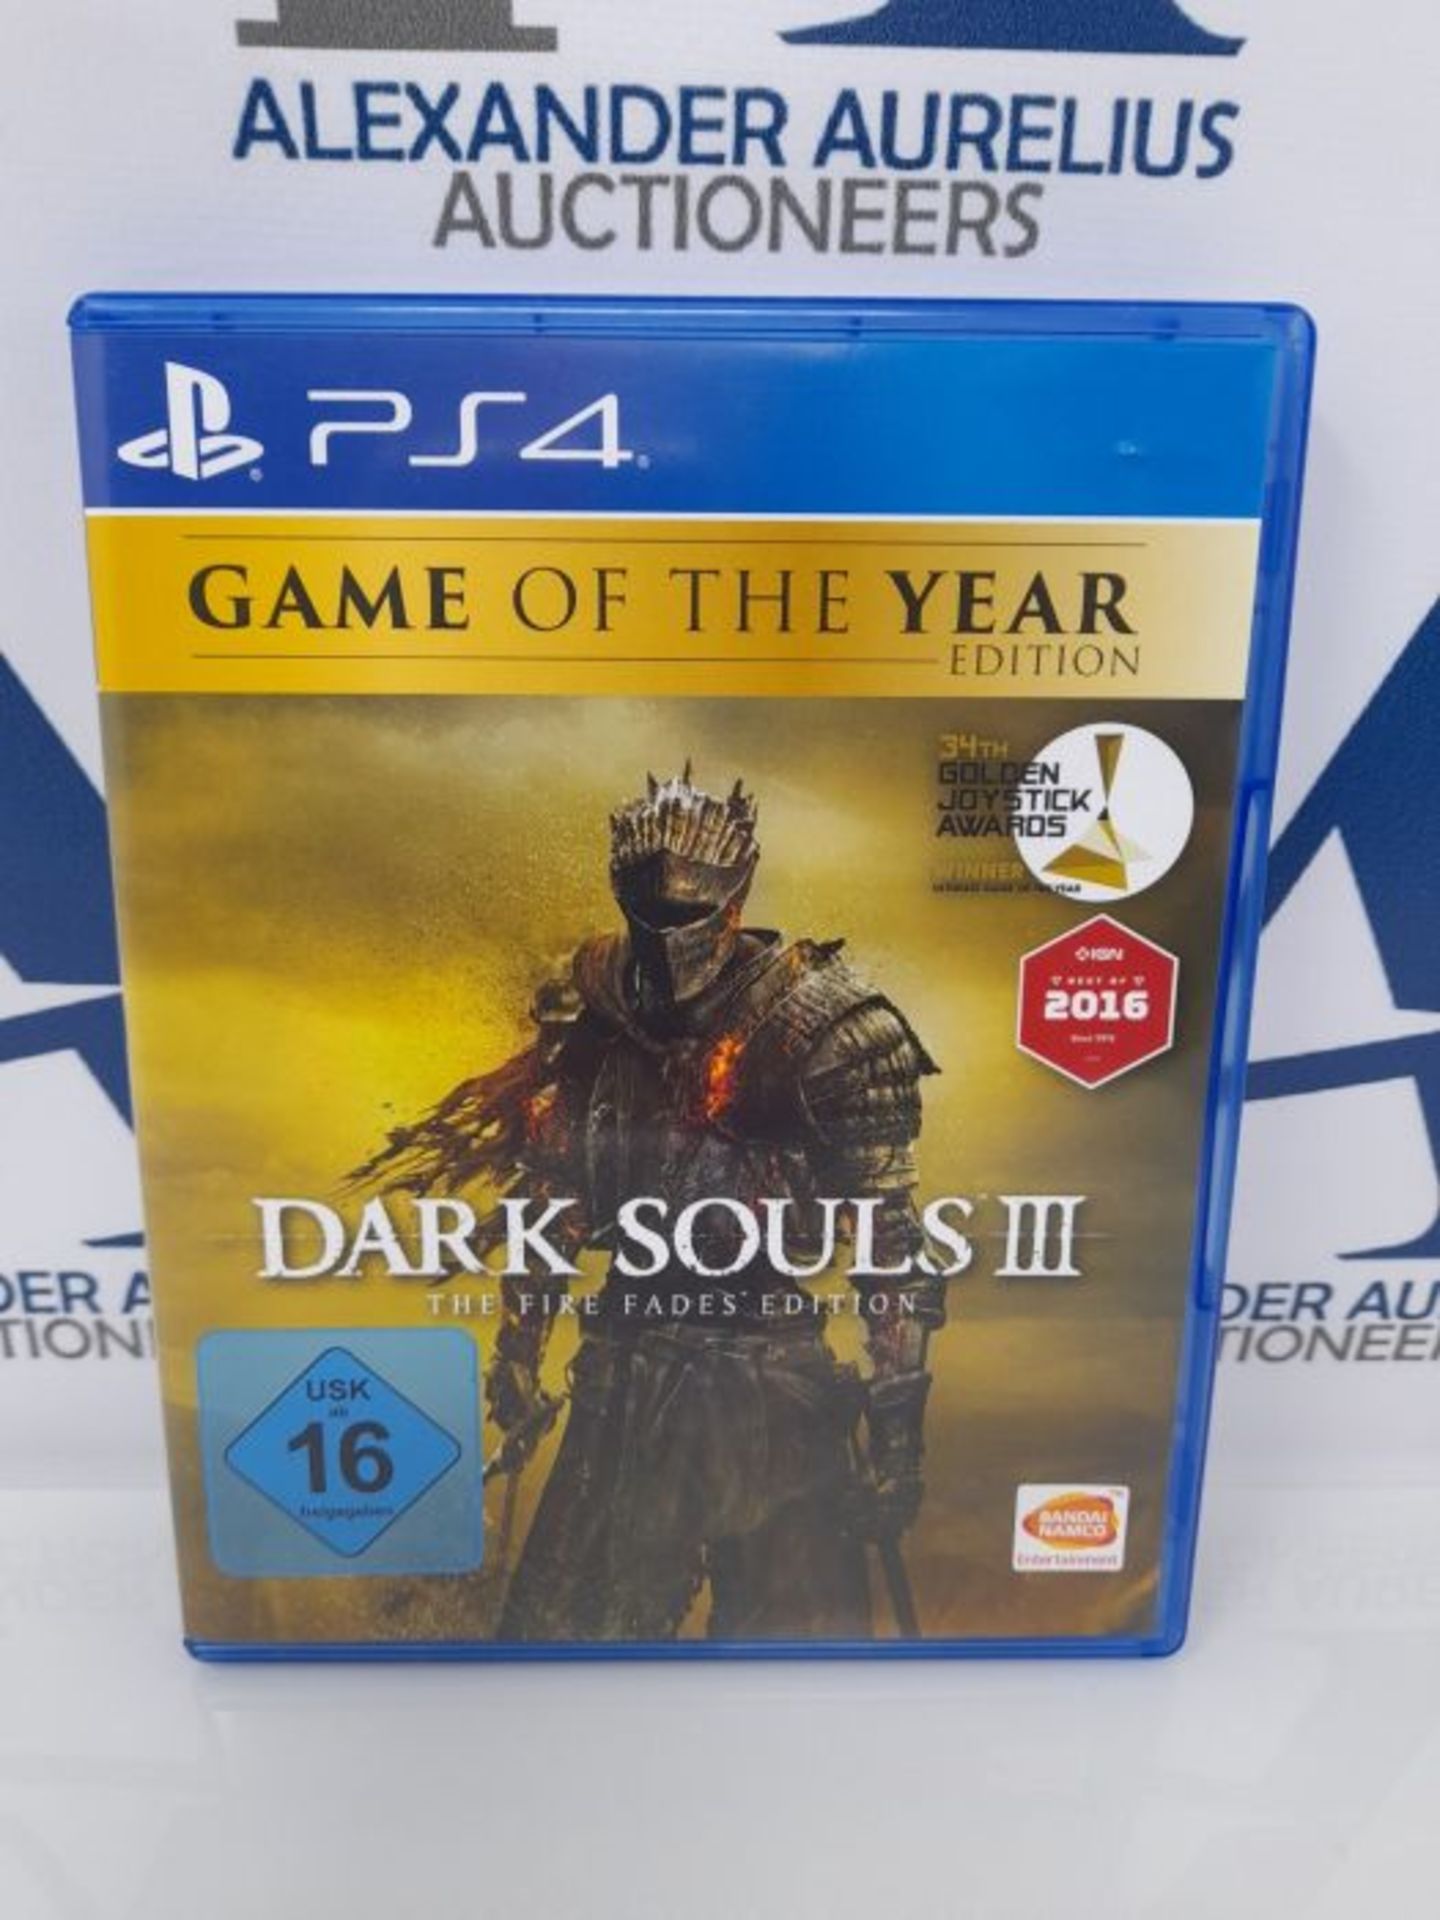 Dark Souls 3 - The Fire Fades Edition (Game of the Year Edition) - Image 2 of 3